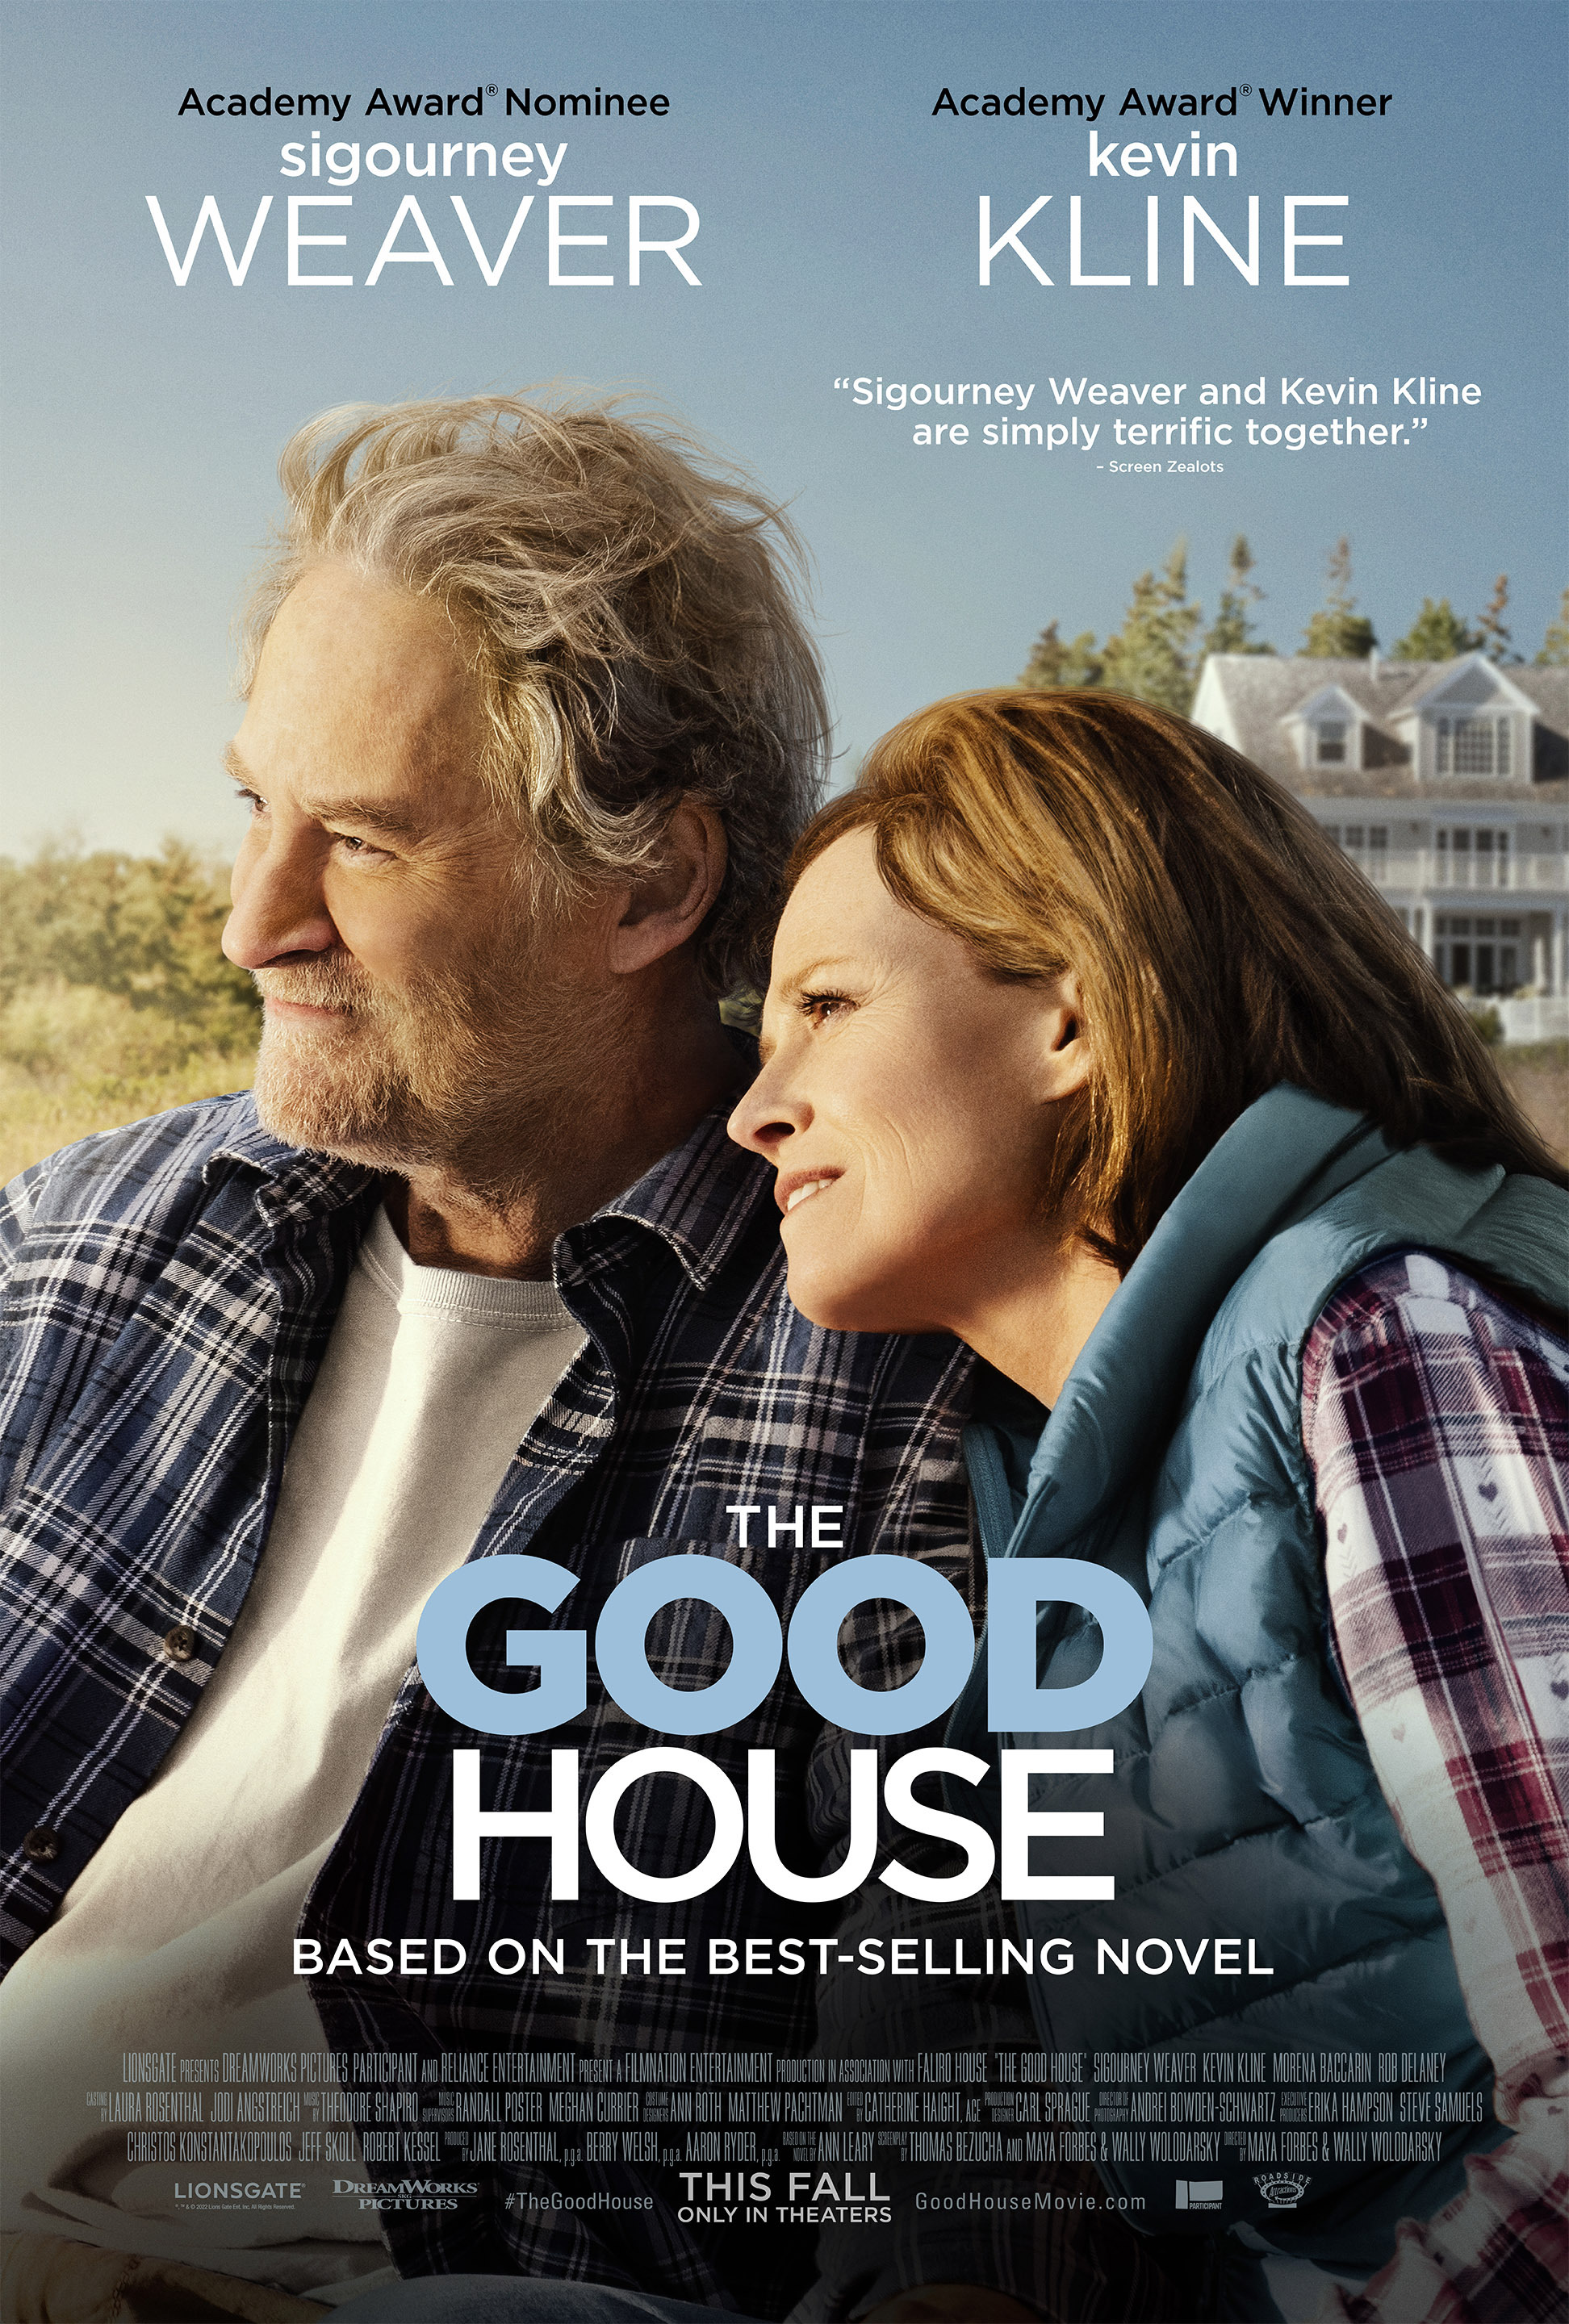 Cover Art for "The Good House"